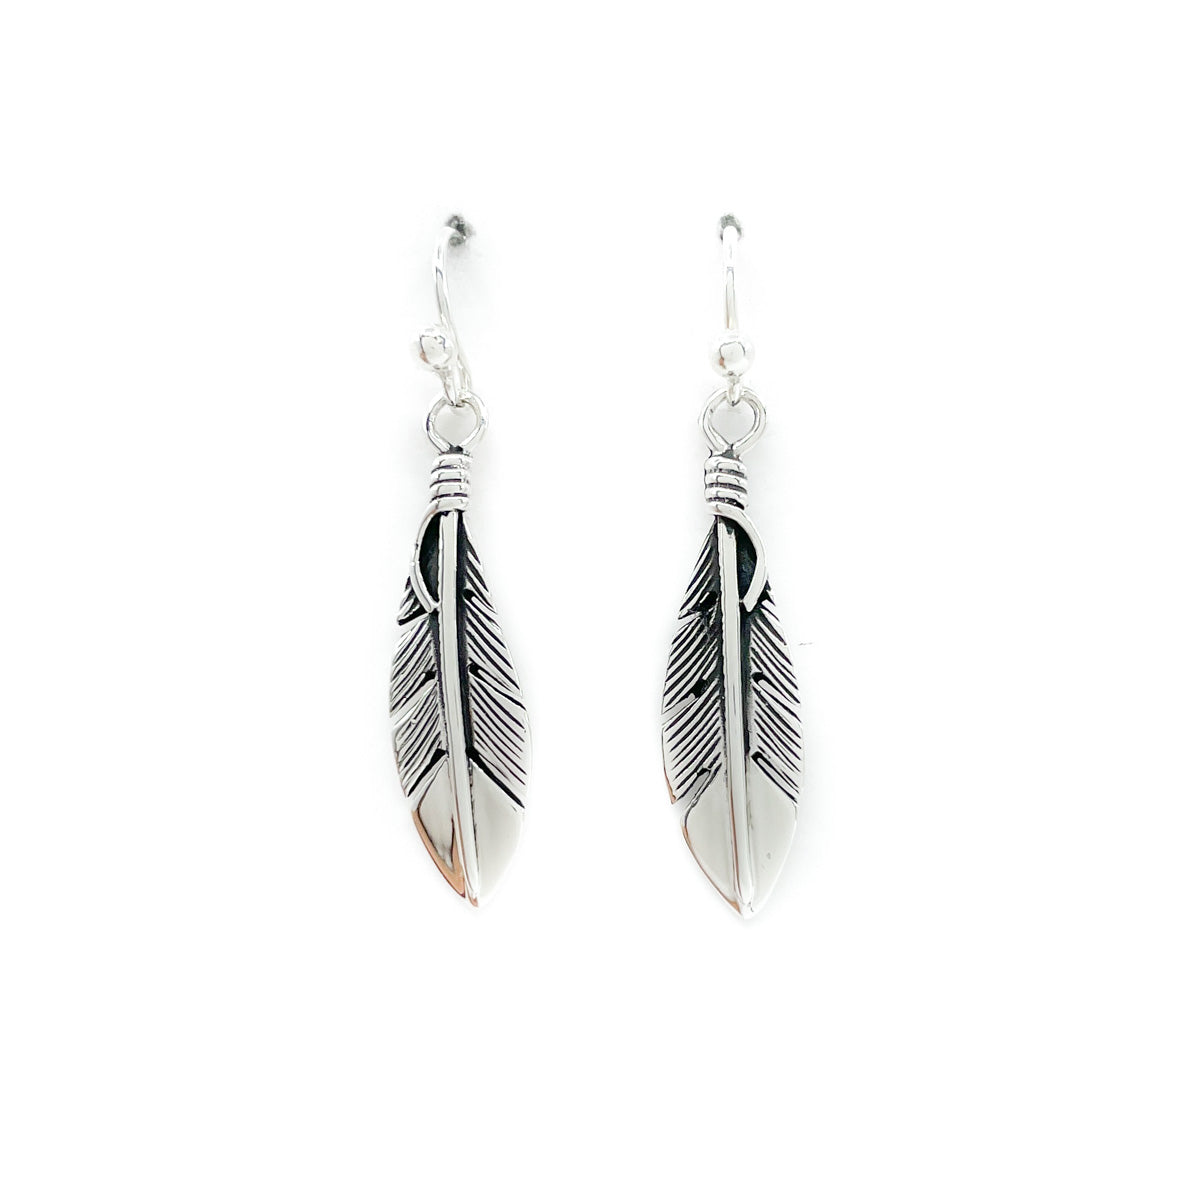 SMALL SILVER PLATED FEATHER DROP EARRINGS - THE DIVINE TRIBE